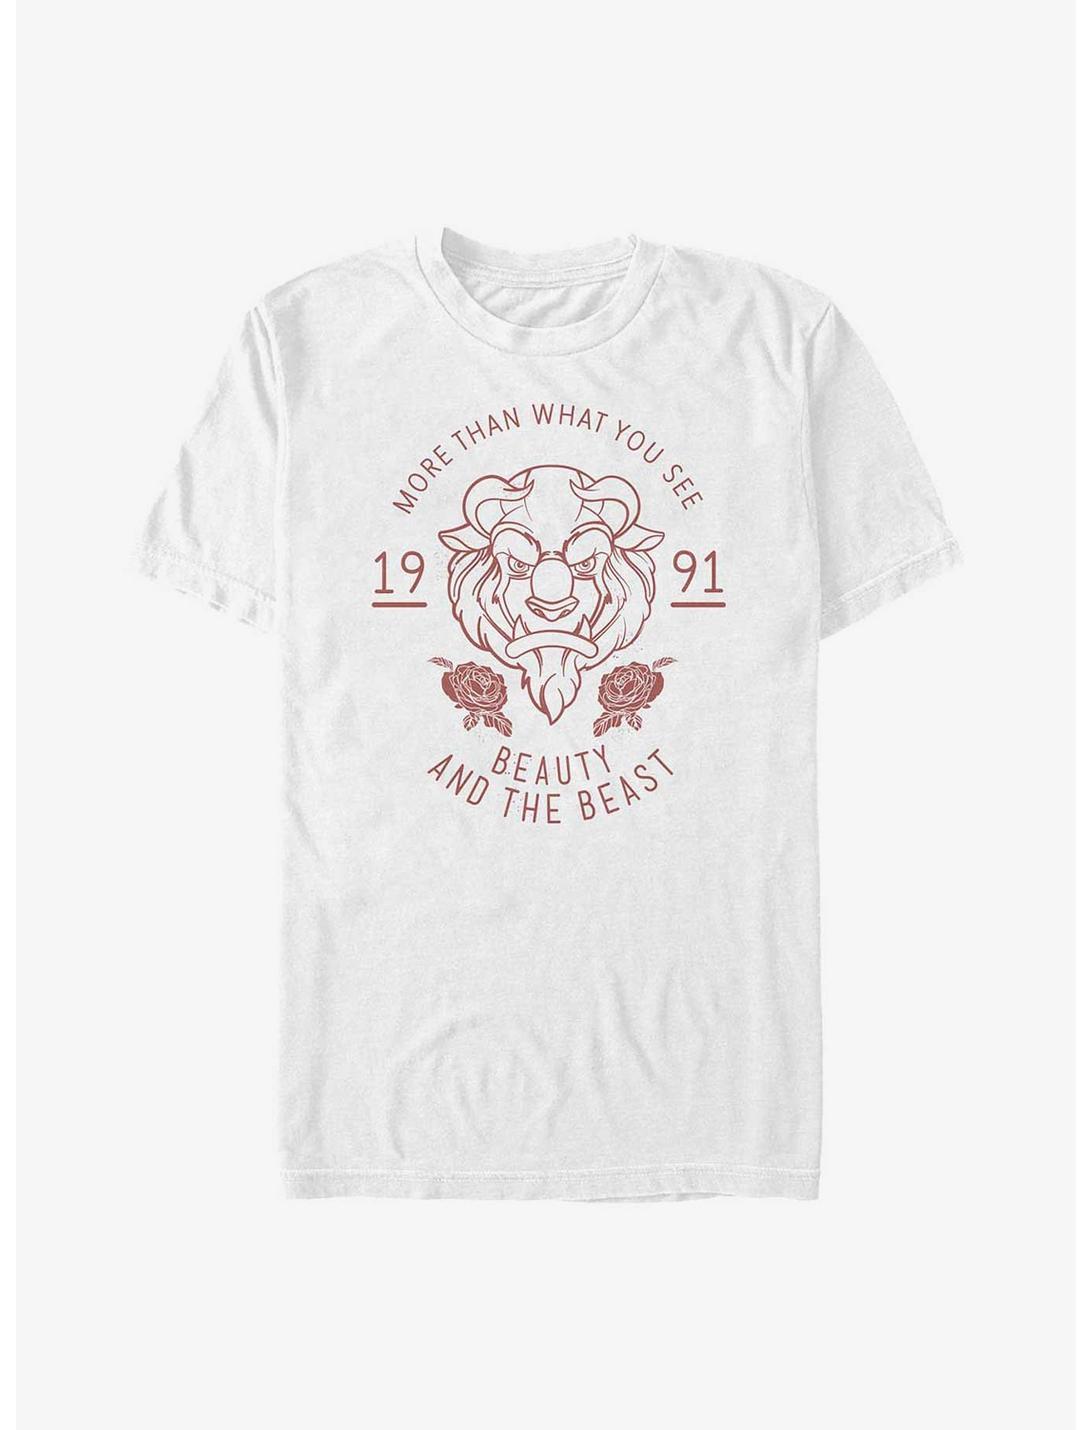 Disney Beauty and the Beast More Than What You See T-Shirt, WHITE, hi-res